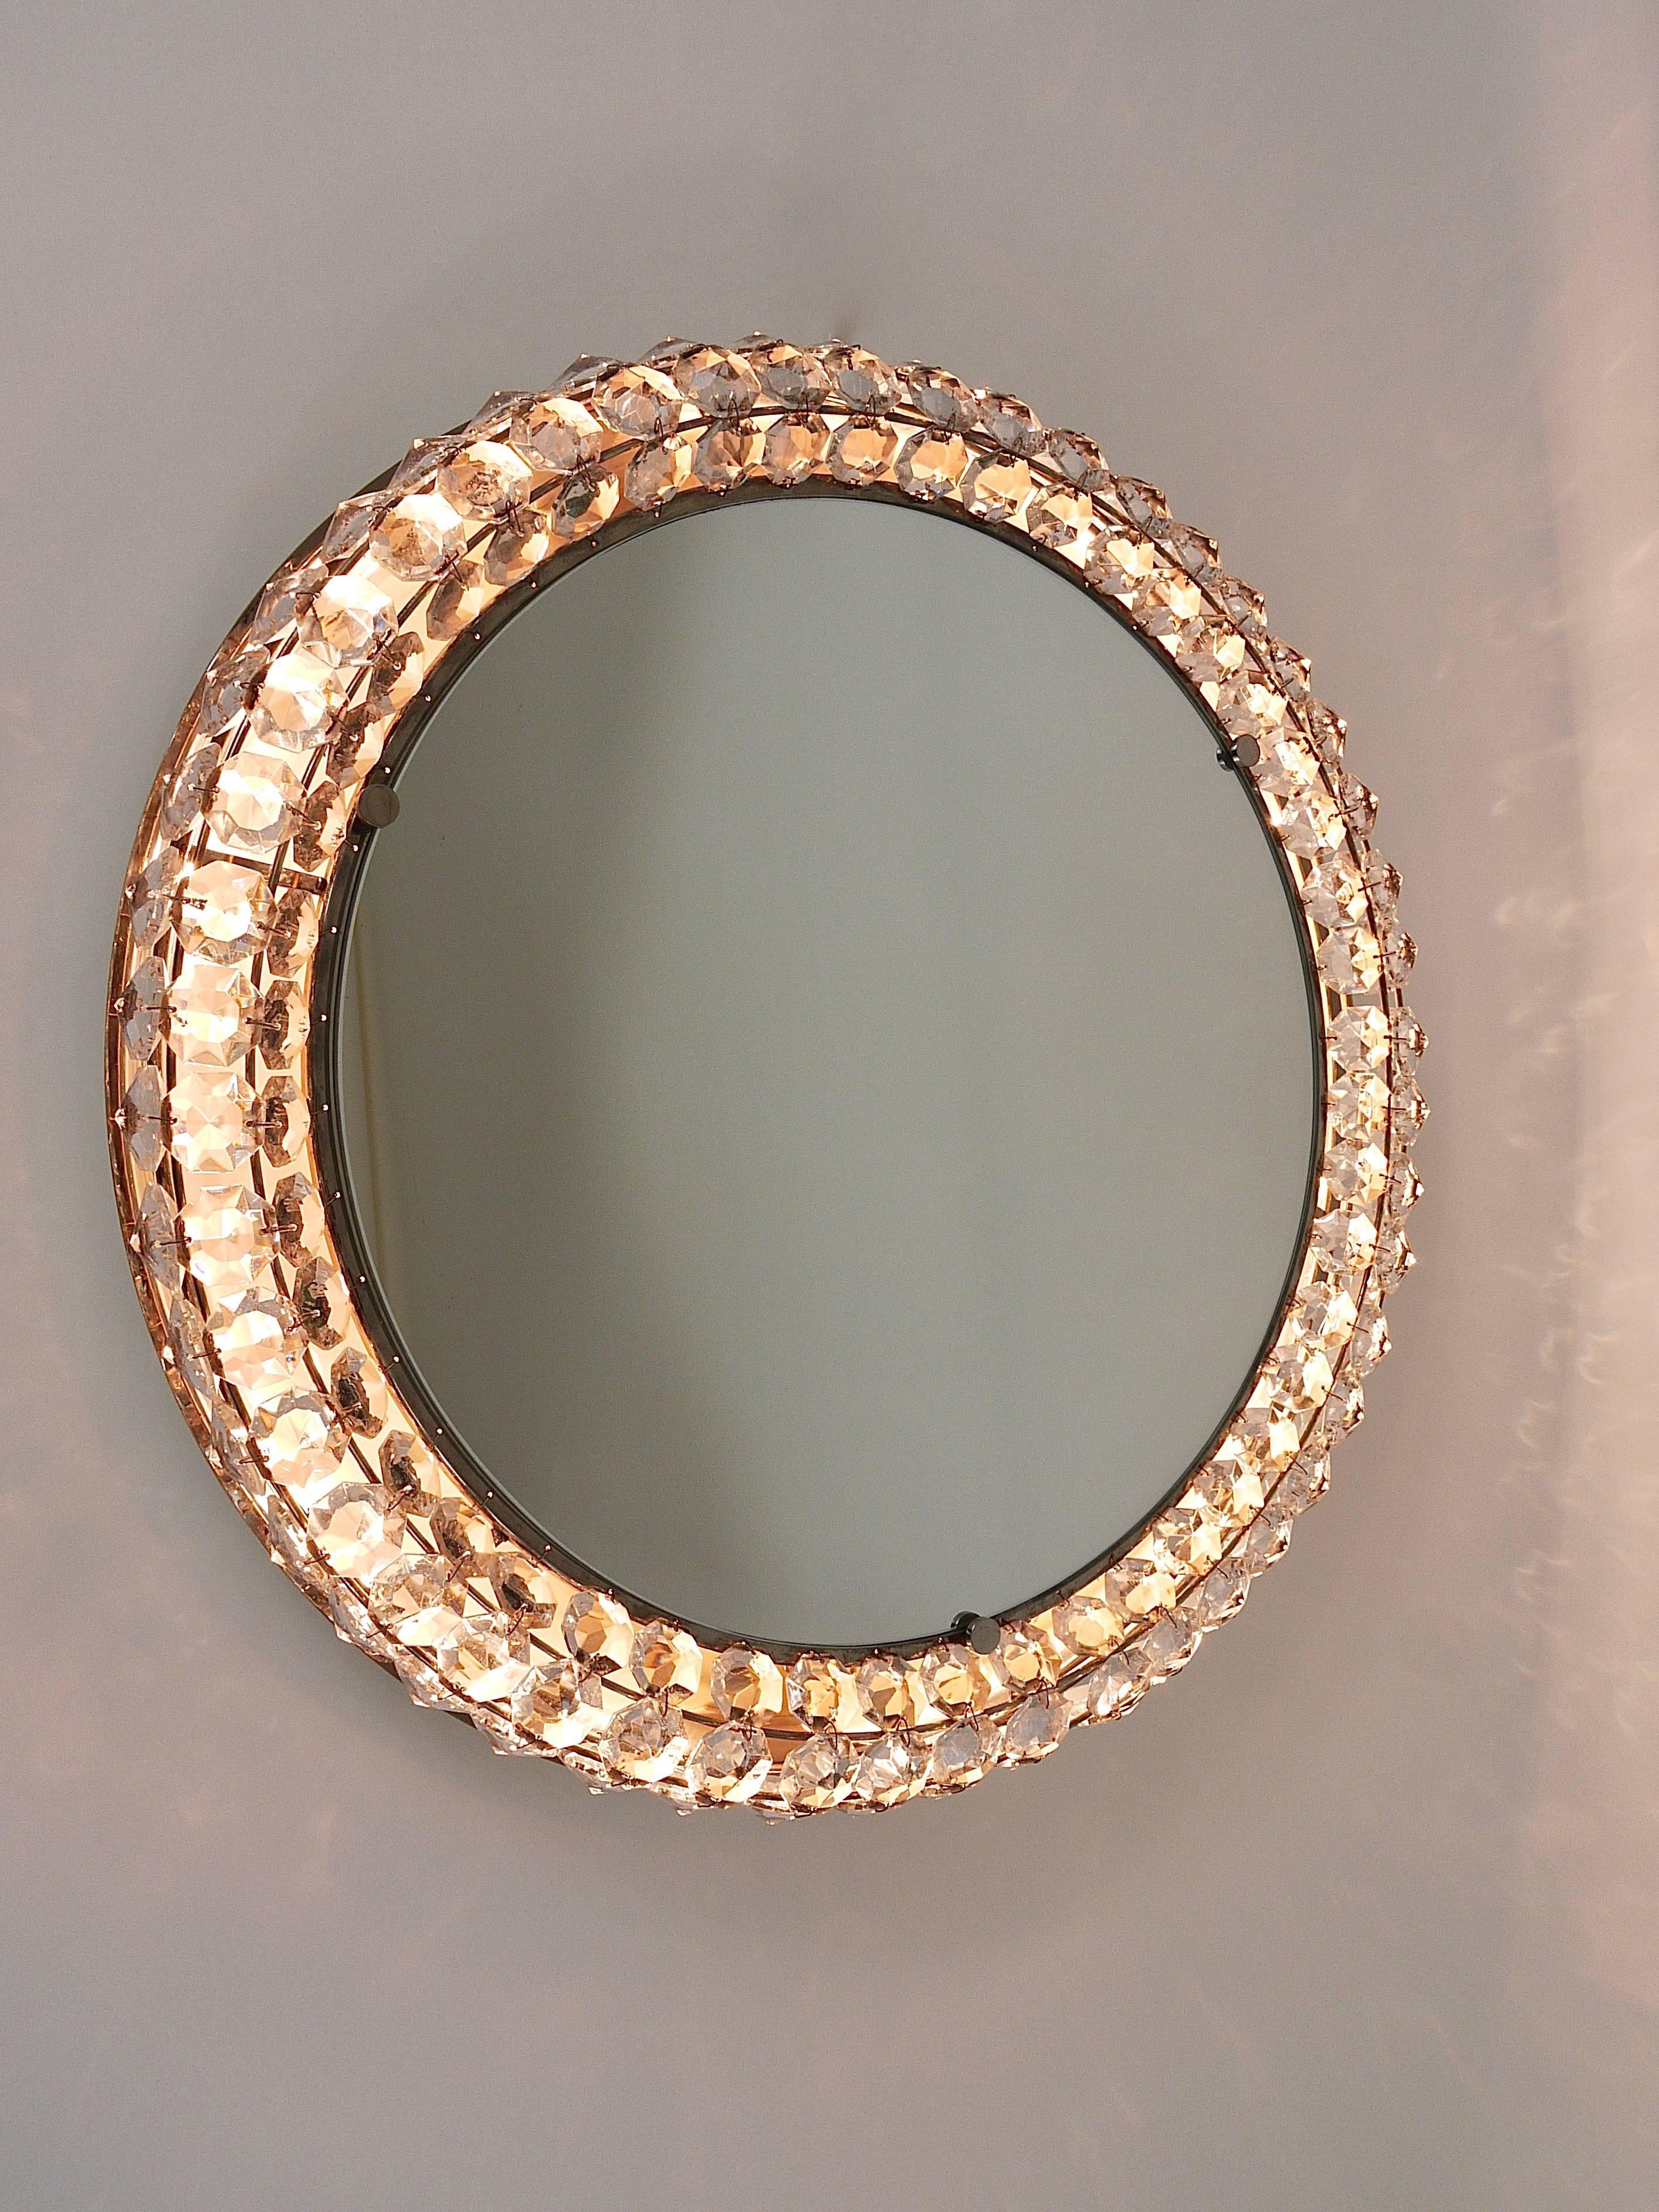 An exquisite Mid-Century circular wall mirror, designed and crafted by Bakalowits & Söhne in the 1950s. This stunning piece features a frame adorned with three concentric rows of diamond-shaped, faceted crystals. The frame is made from 